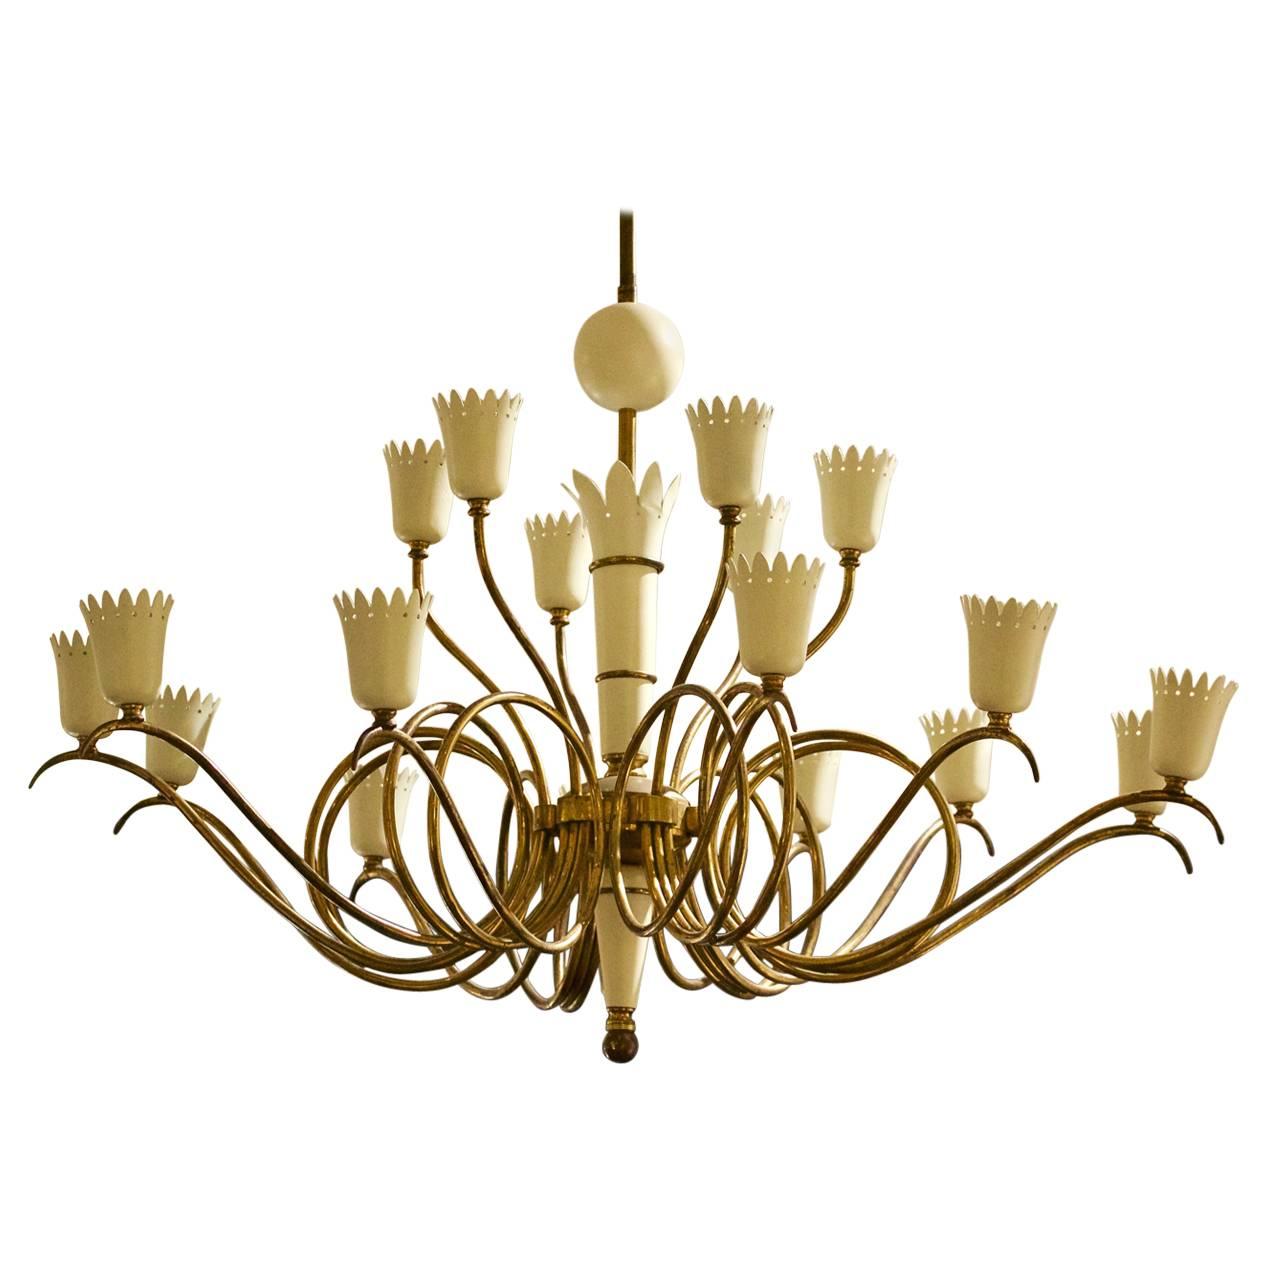 Brass Chandelier with Crown-Shaped Details, Mid-20th Century, Italy